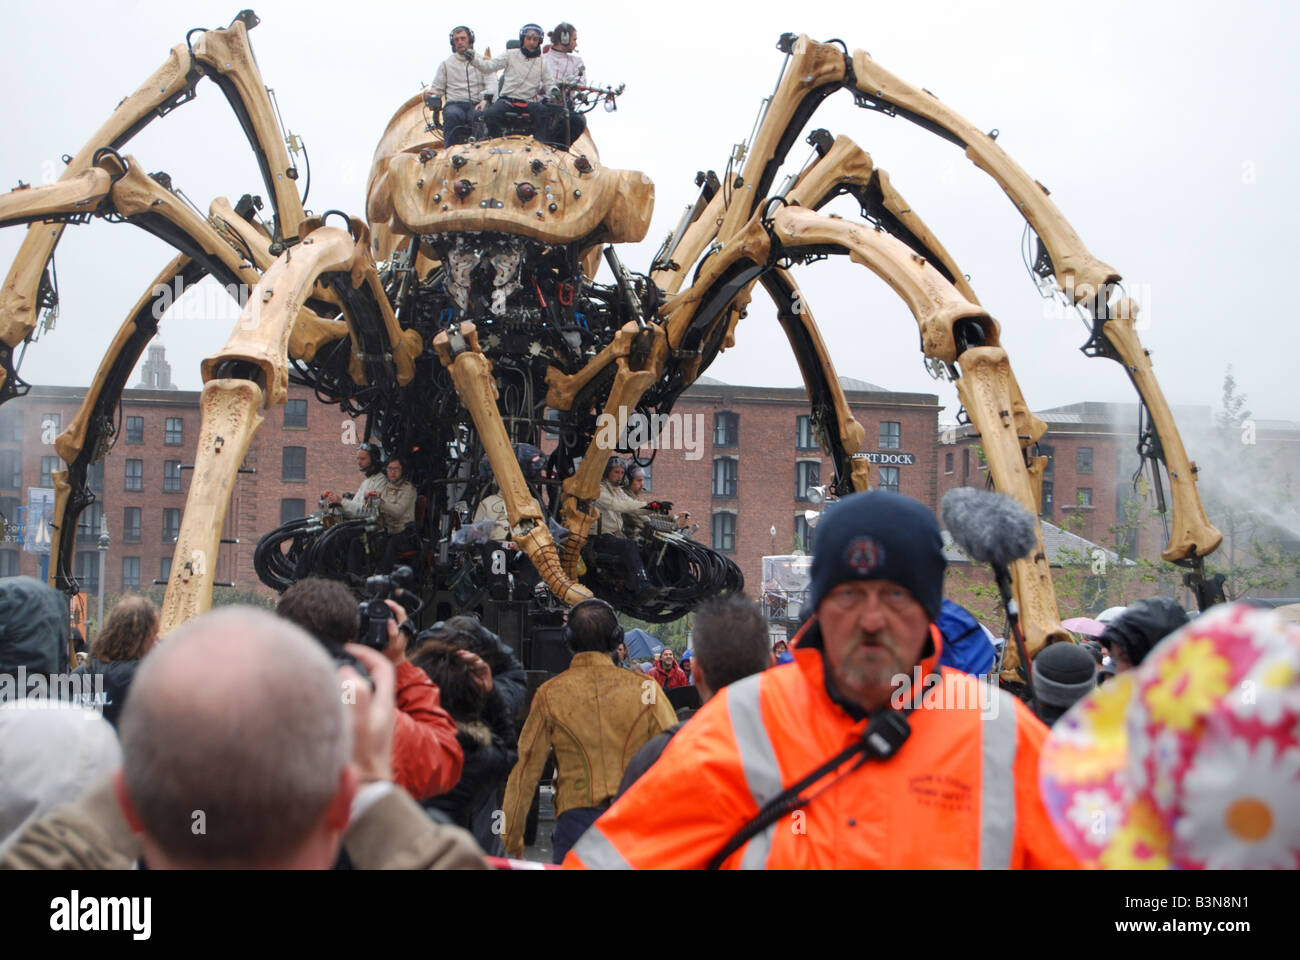 La Princesse the creation of Francois Delaroziere and LA Machine looms menacingly above the crowd on a rainy day at Liverpool Stock Photo